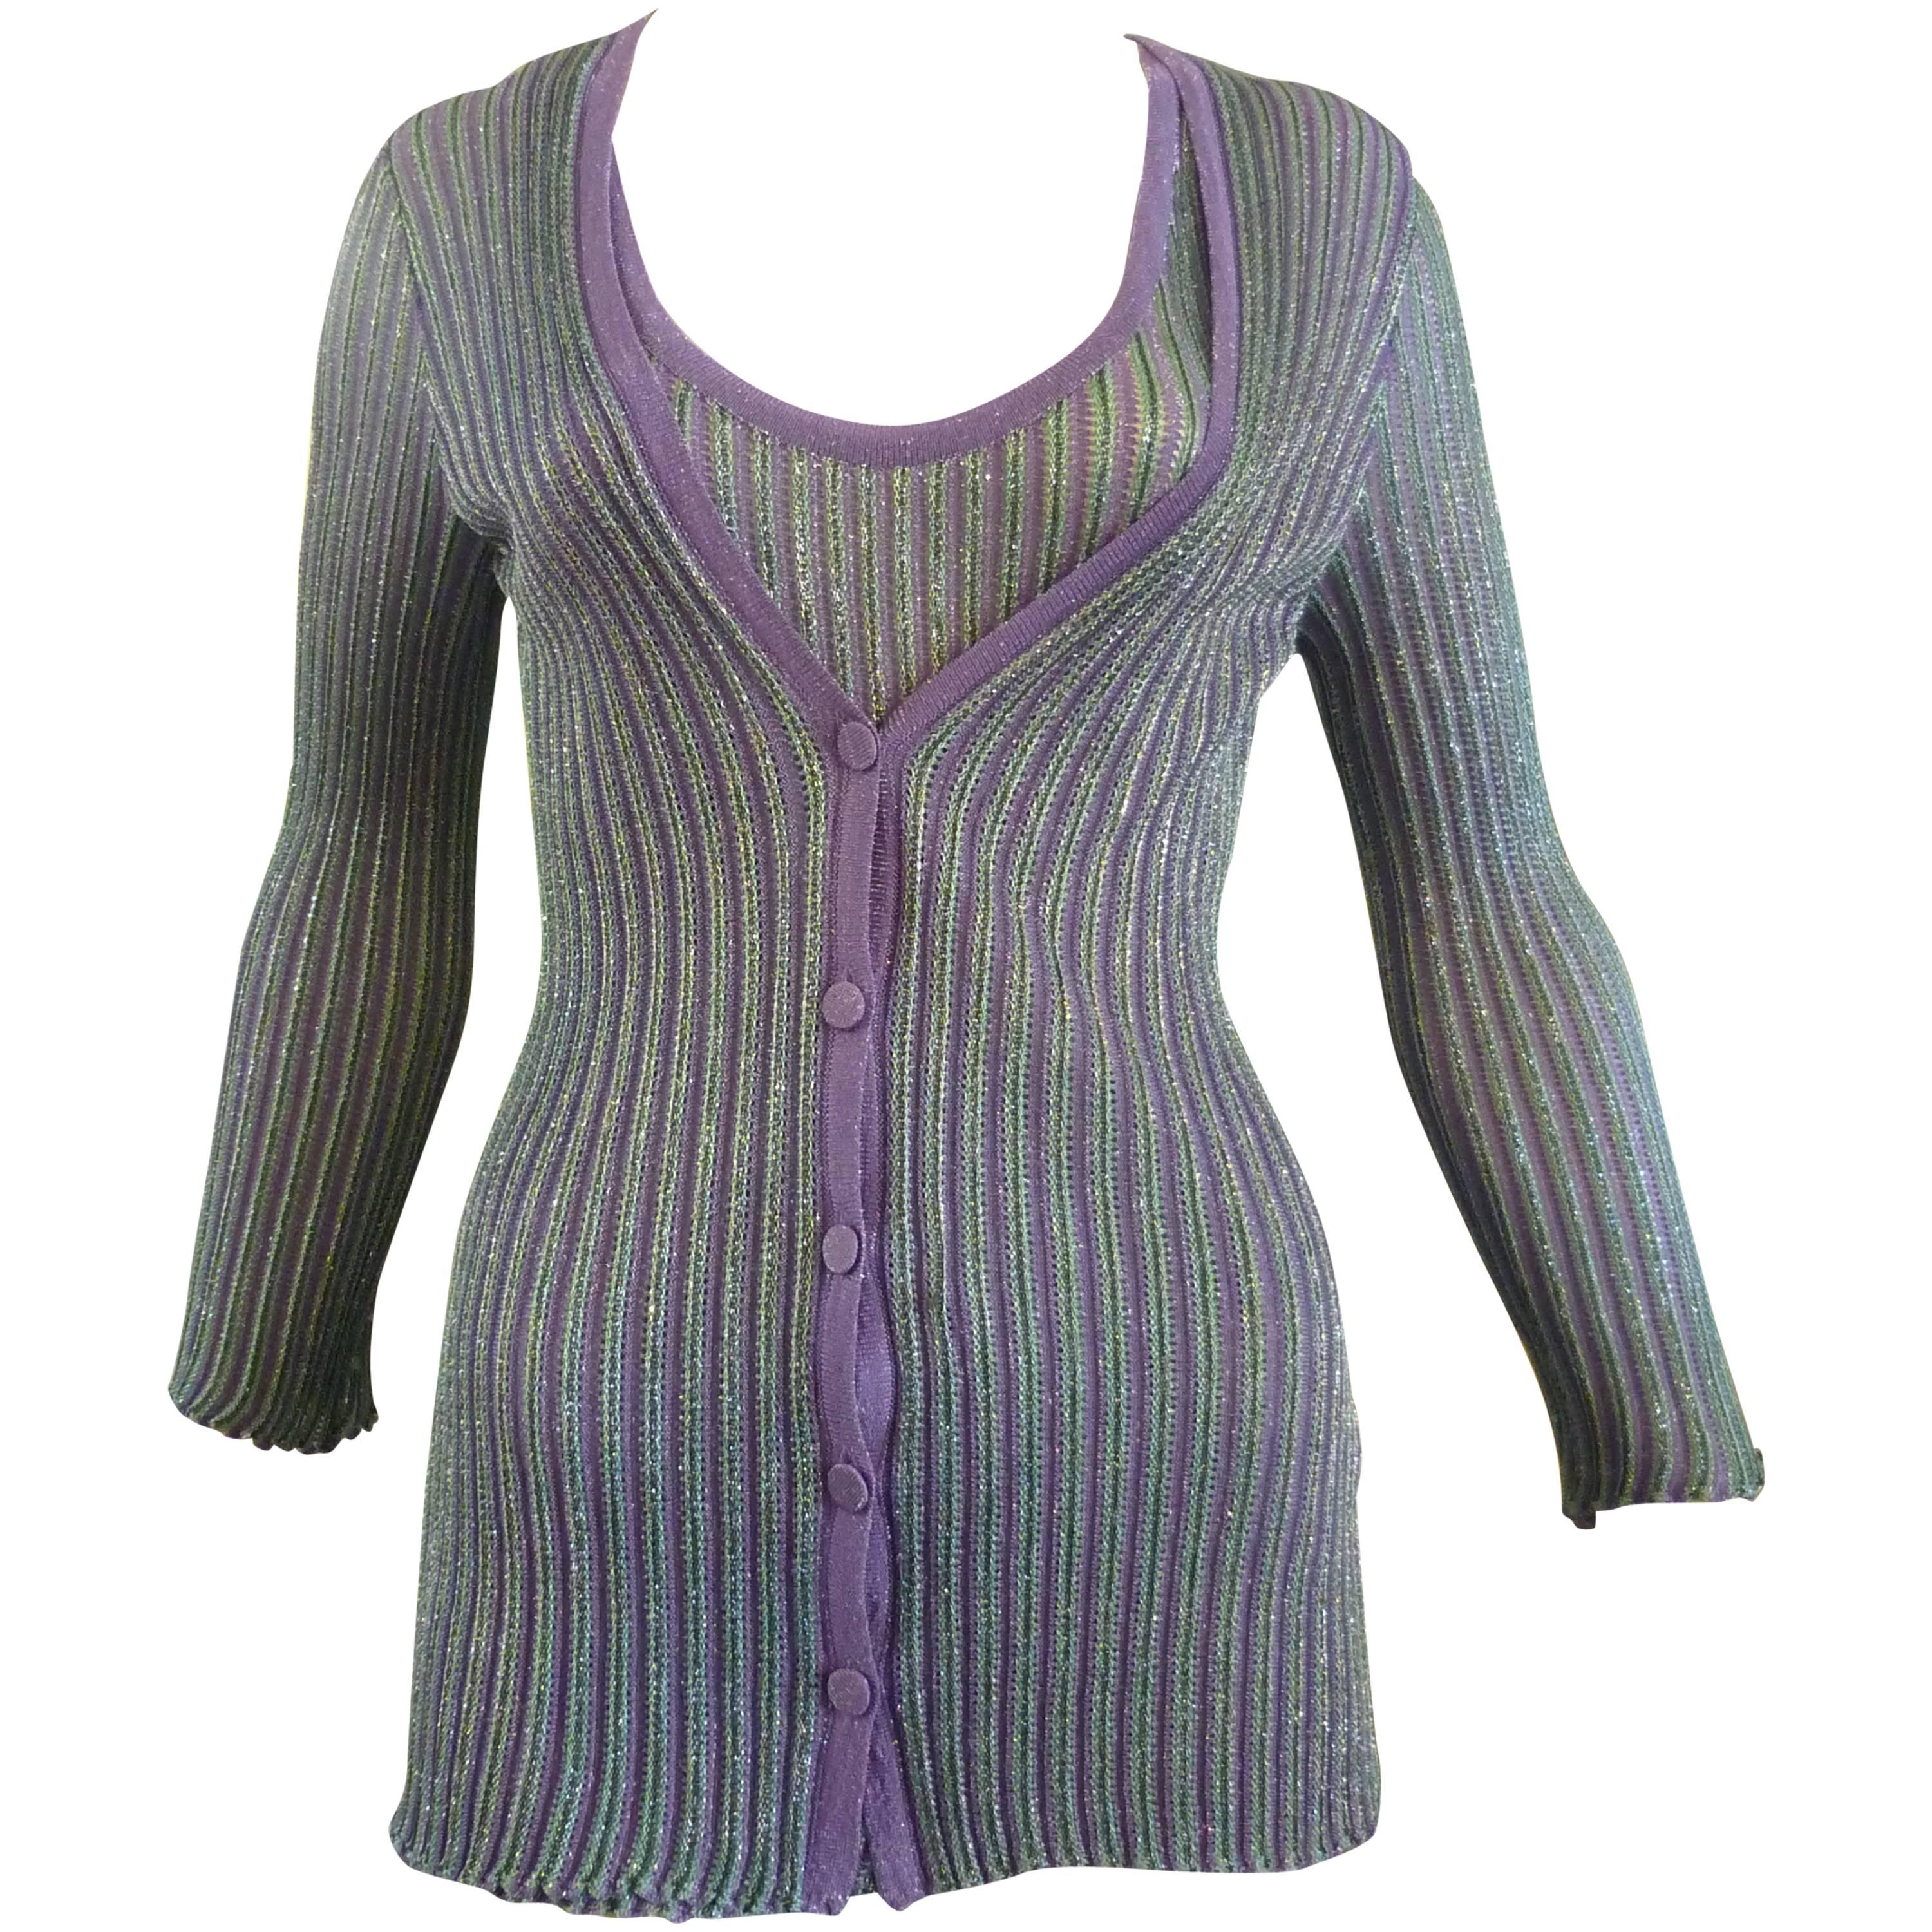 M. Missoni Twin Set with Sleeveless Top (44 ITL)